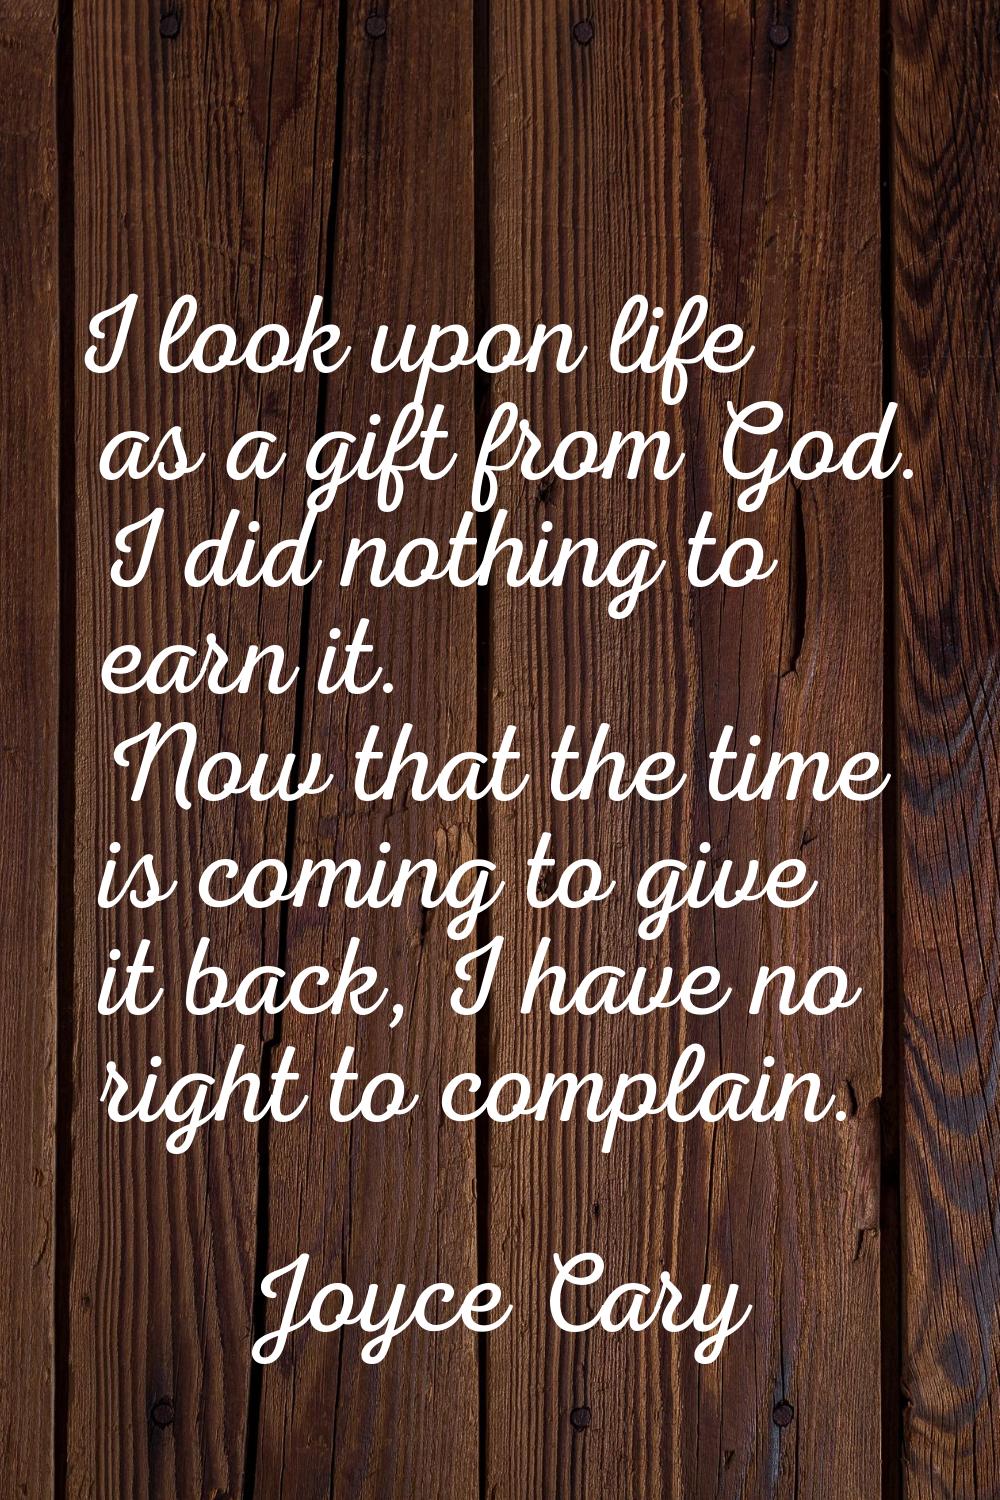 I look upon life as a gift from God. I did nothing to earn it. Now that the time is coming to give 